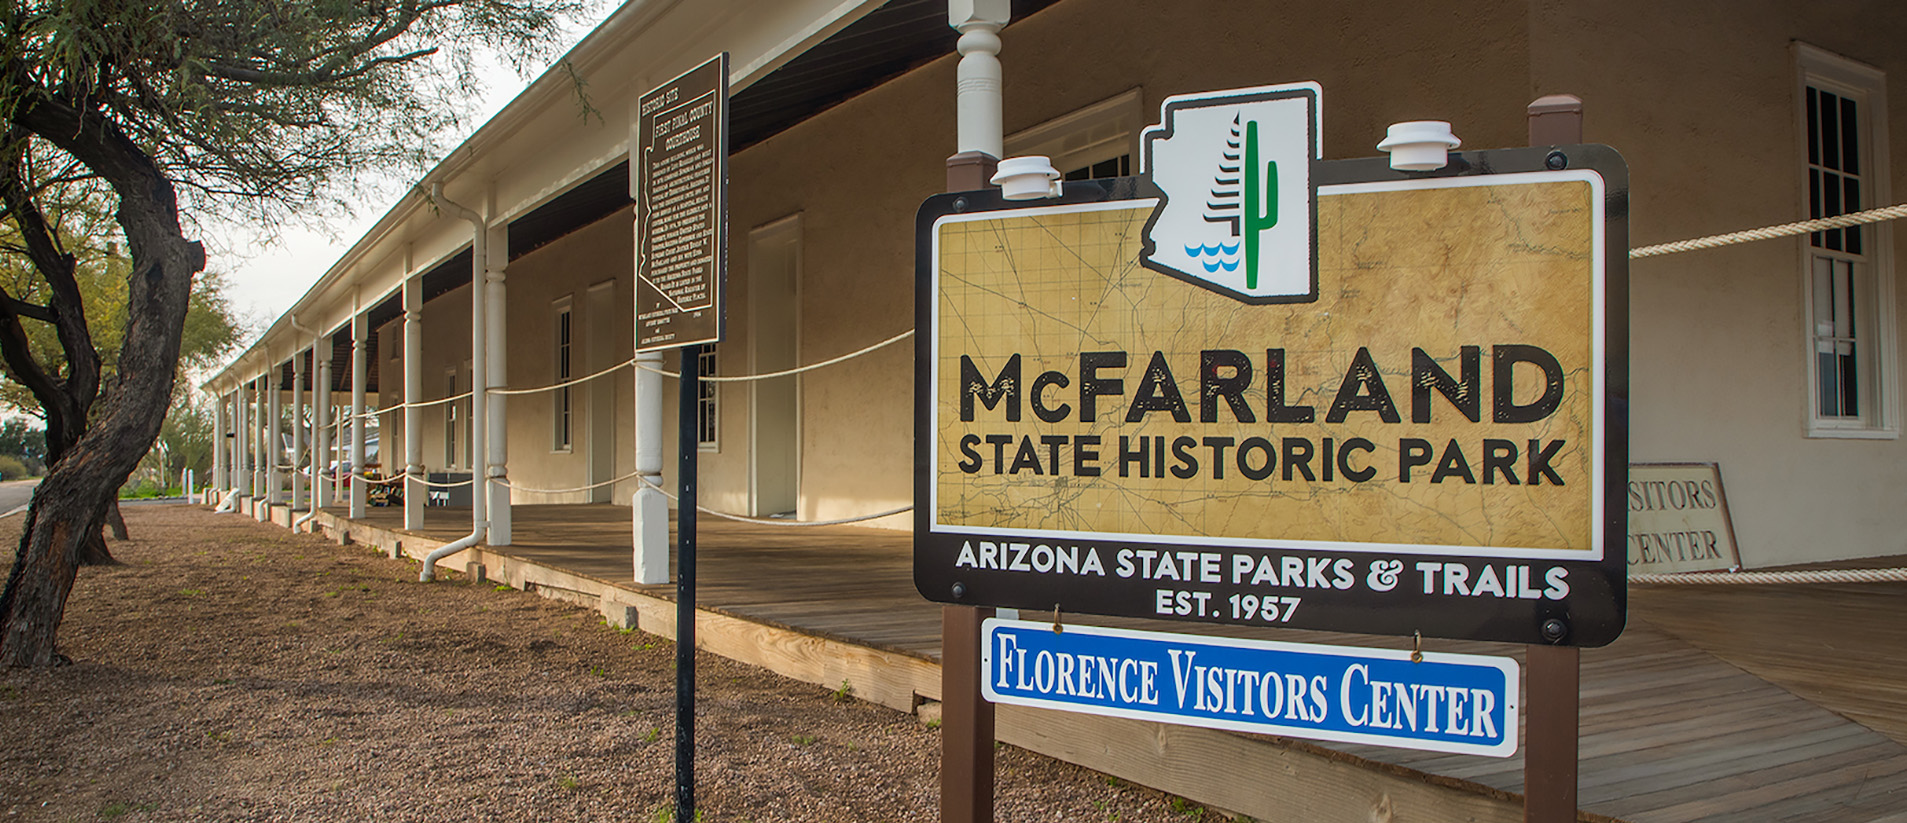 The main sign identifying McFarland State Historic Park and visitor center